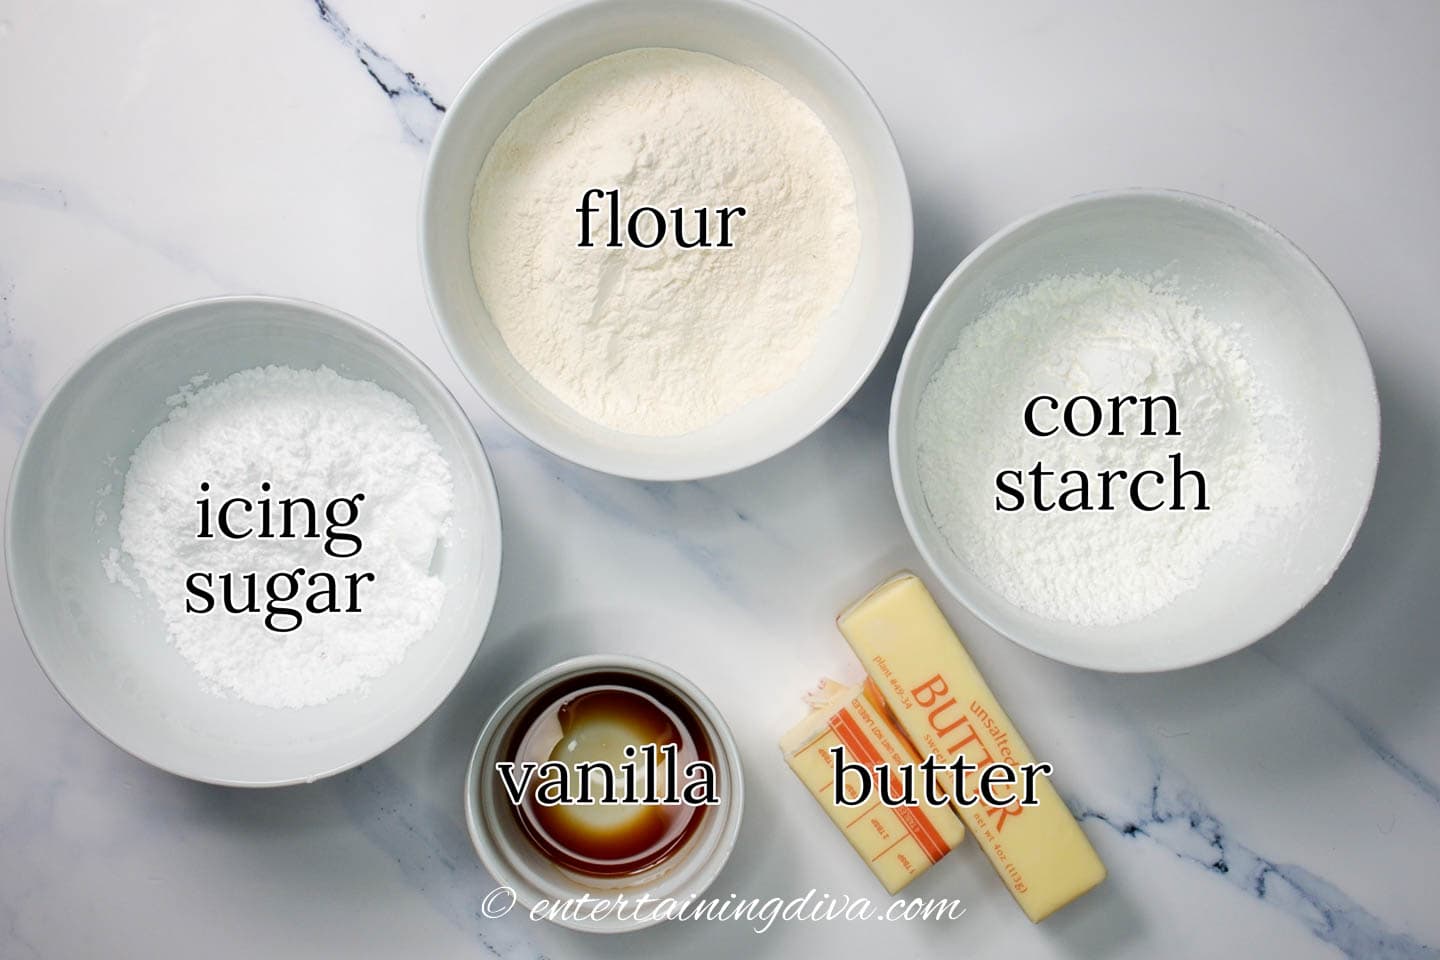 whipped shortbread ingredients - icing sugar, flour, corn starch, vanilla and butter